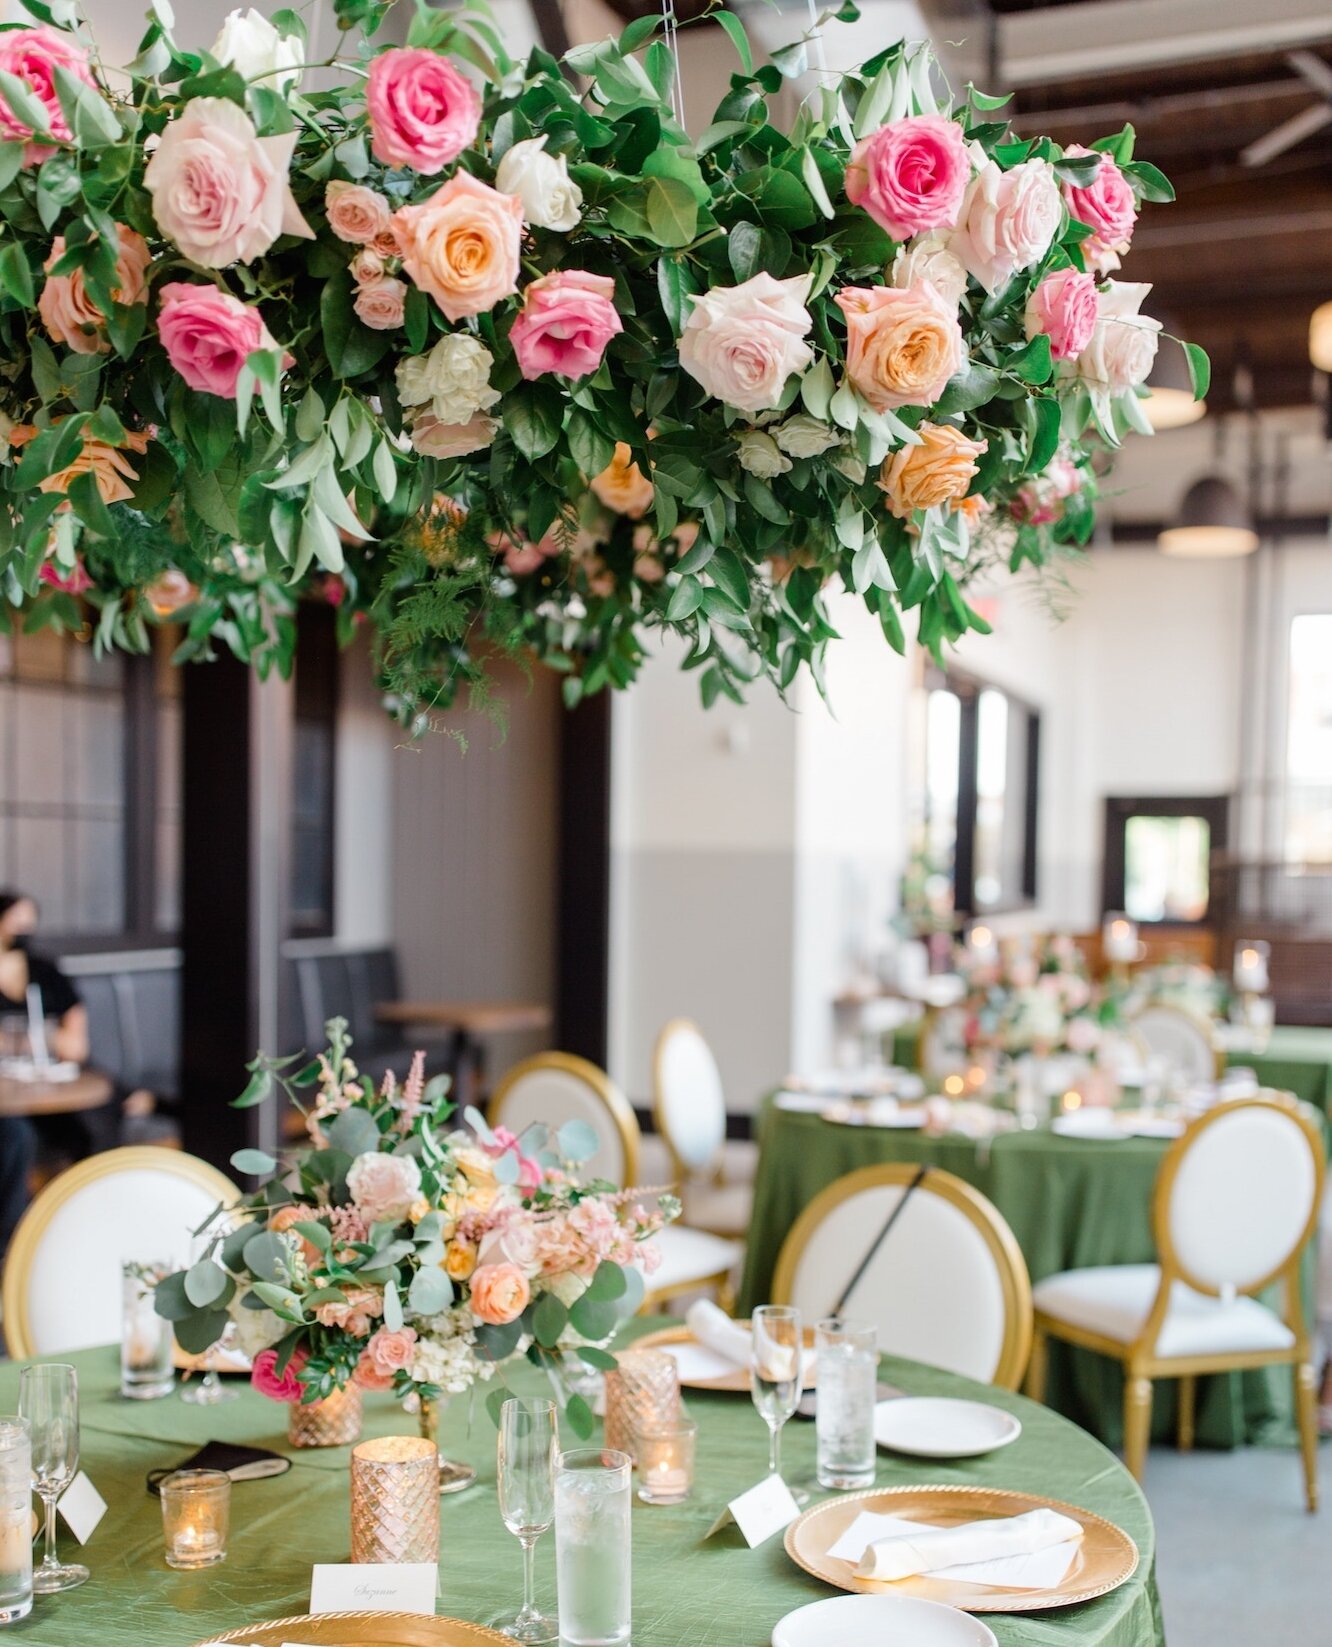 Hanging floral installations are a must-have for a high-impact, endlessly memorable wedding reception. Let us create a whimsical, floating feature for you! ⁠
⁠
Photo: @camiwade⁠
Venue: @oliveandoak_events